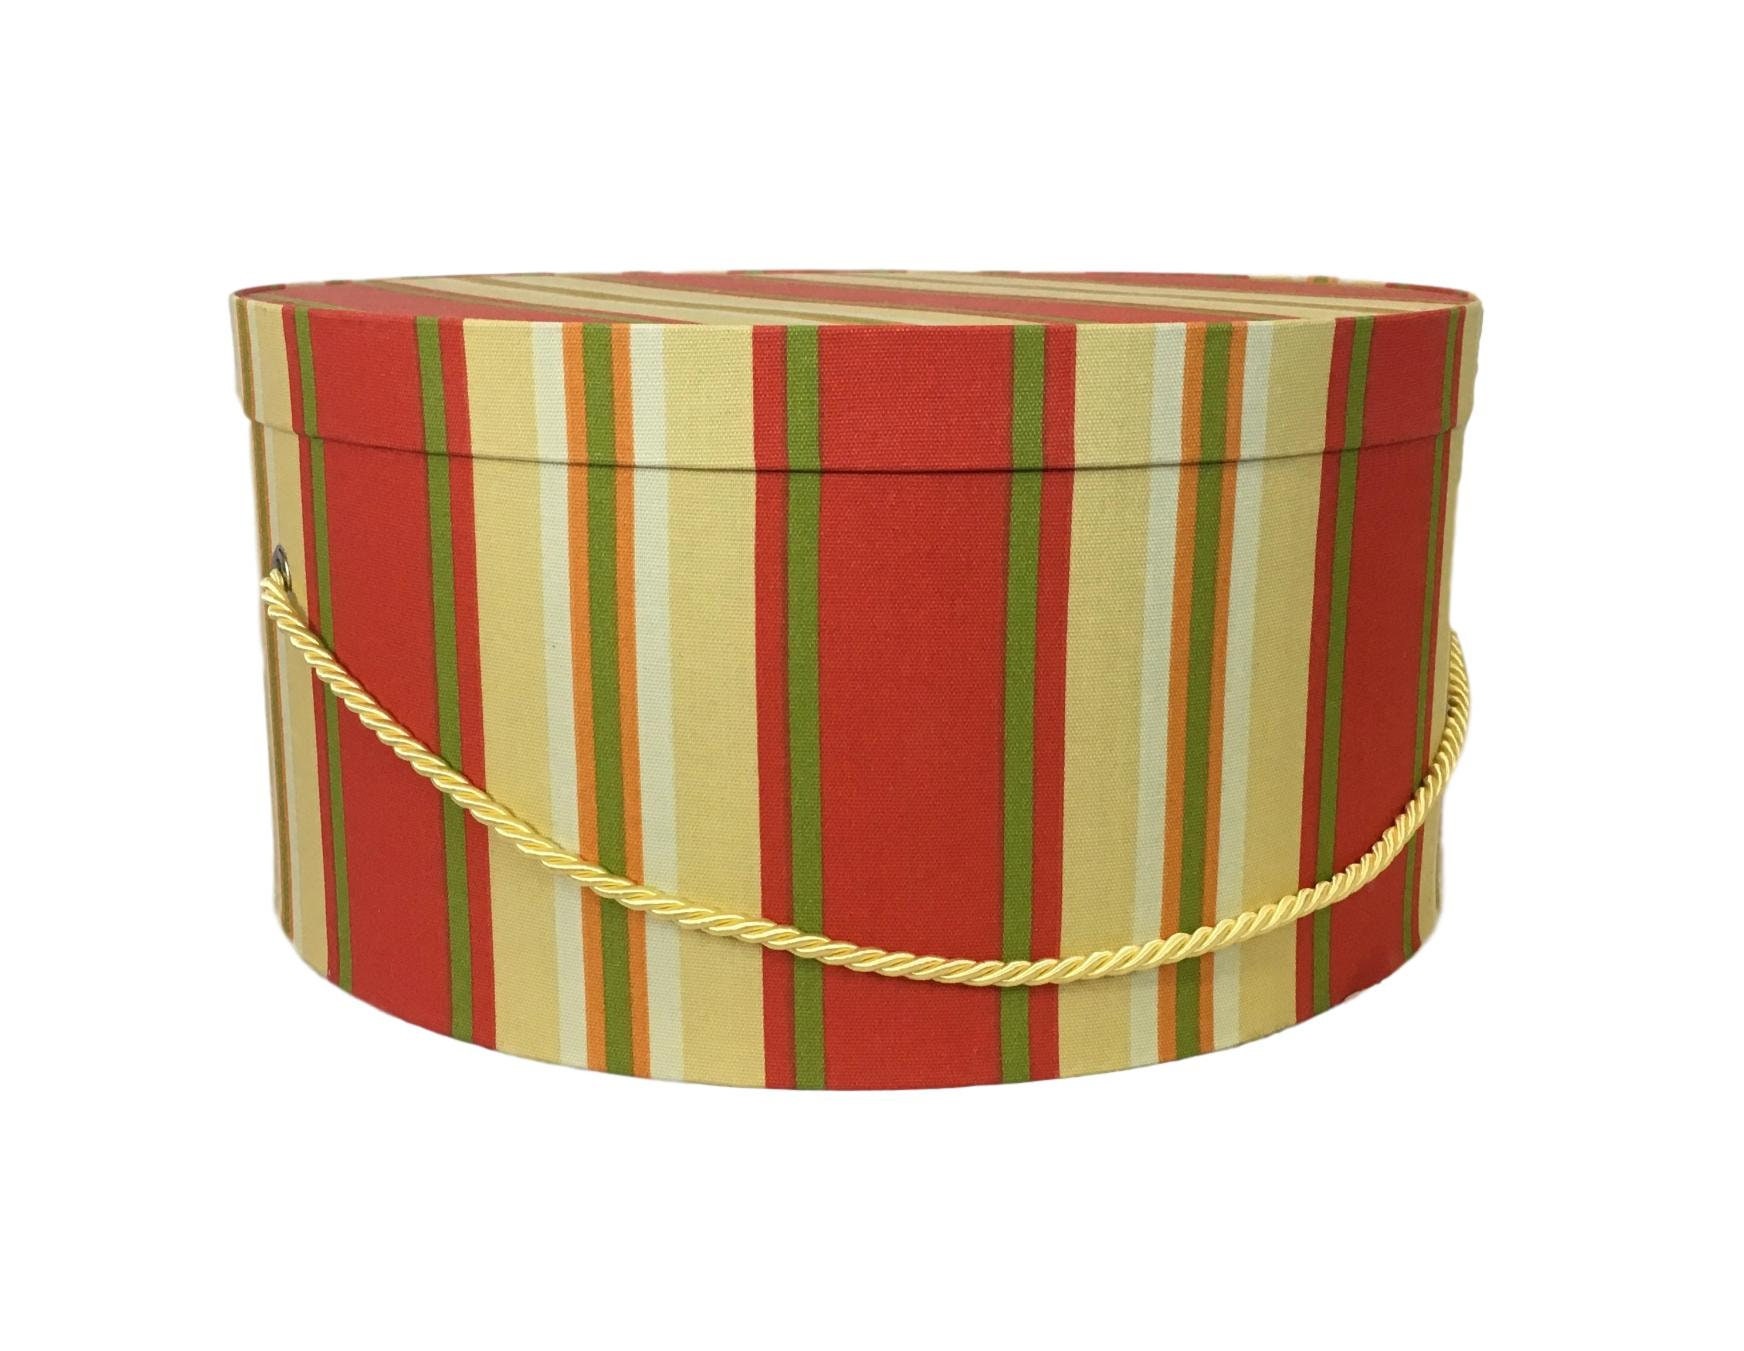 Large 17”x9” Hat Box in Coral, Yellow, and Green Stripe Fabric